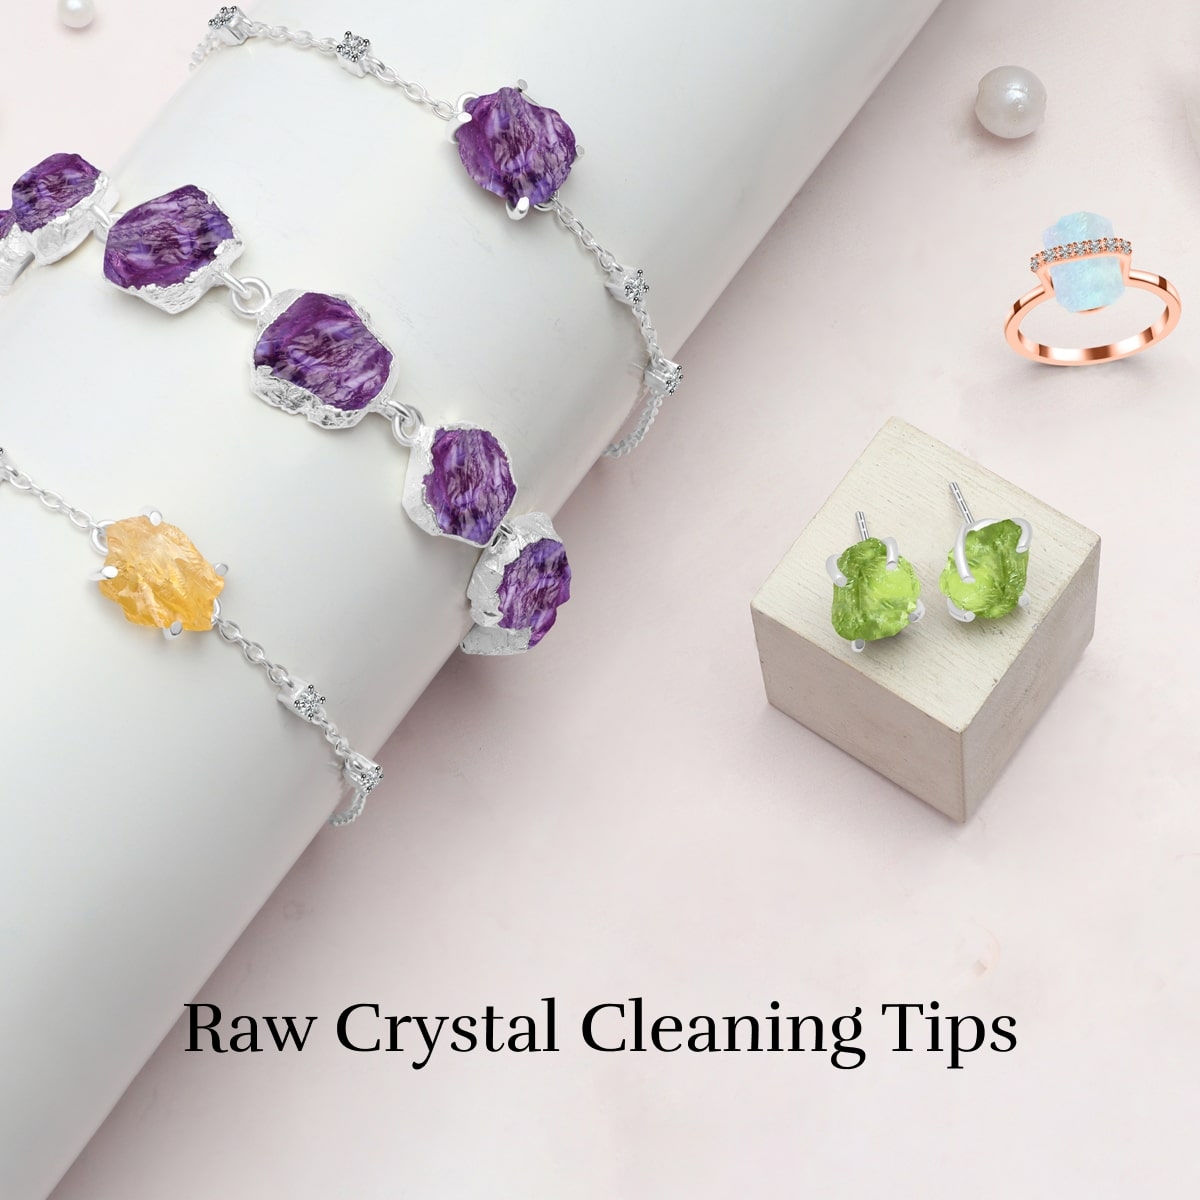 How to Clean a Raw Crystal